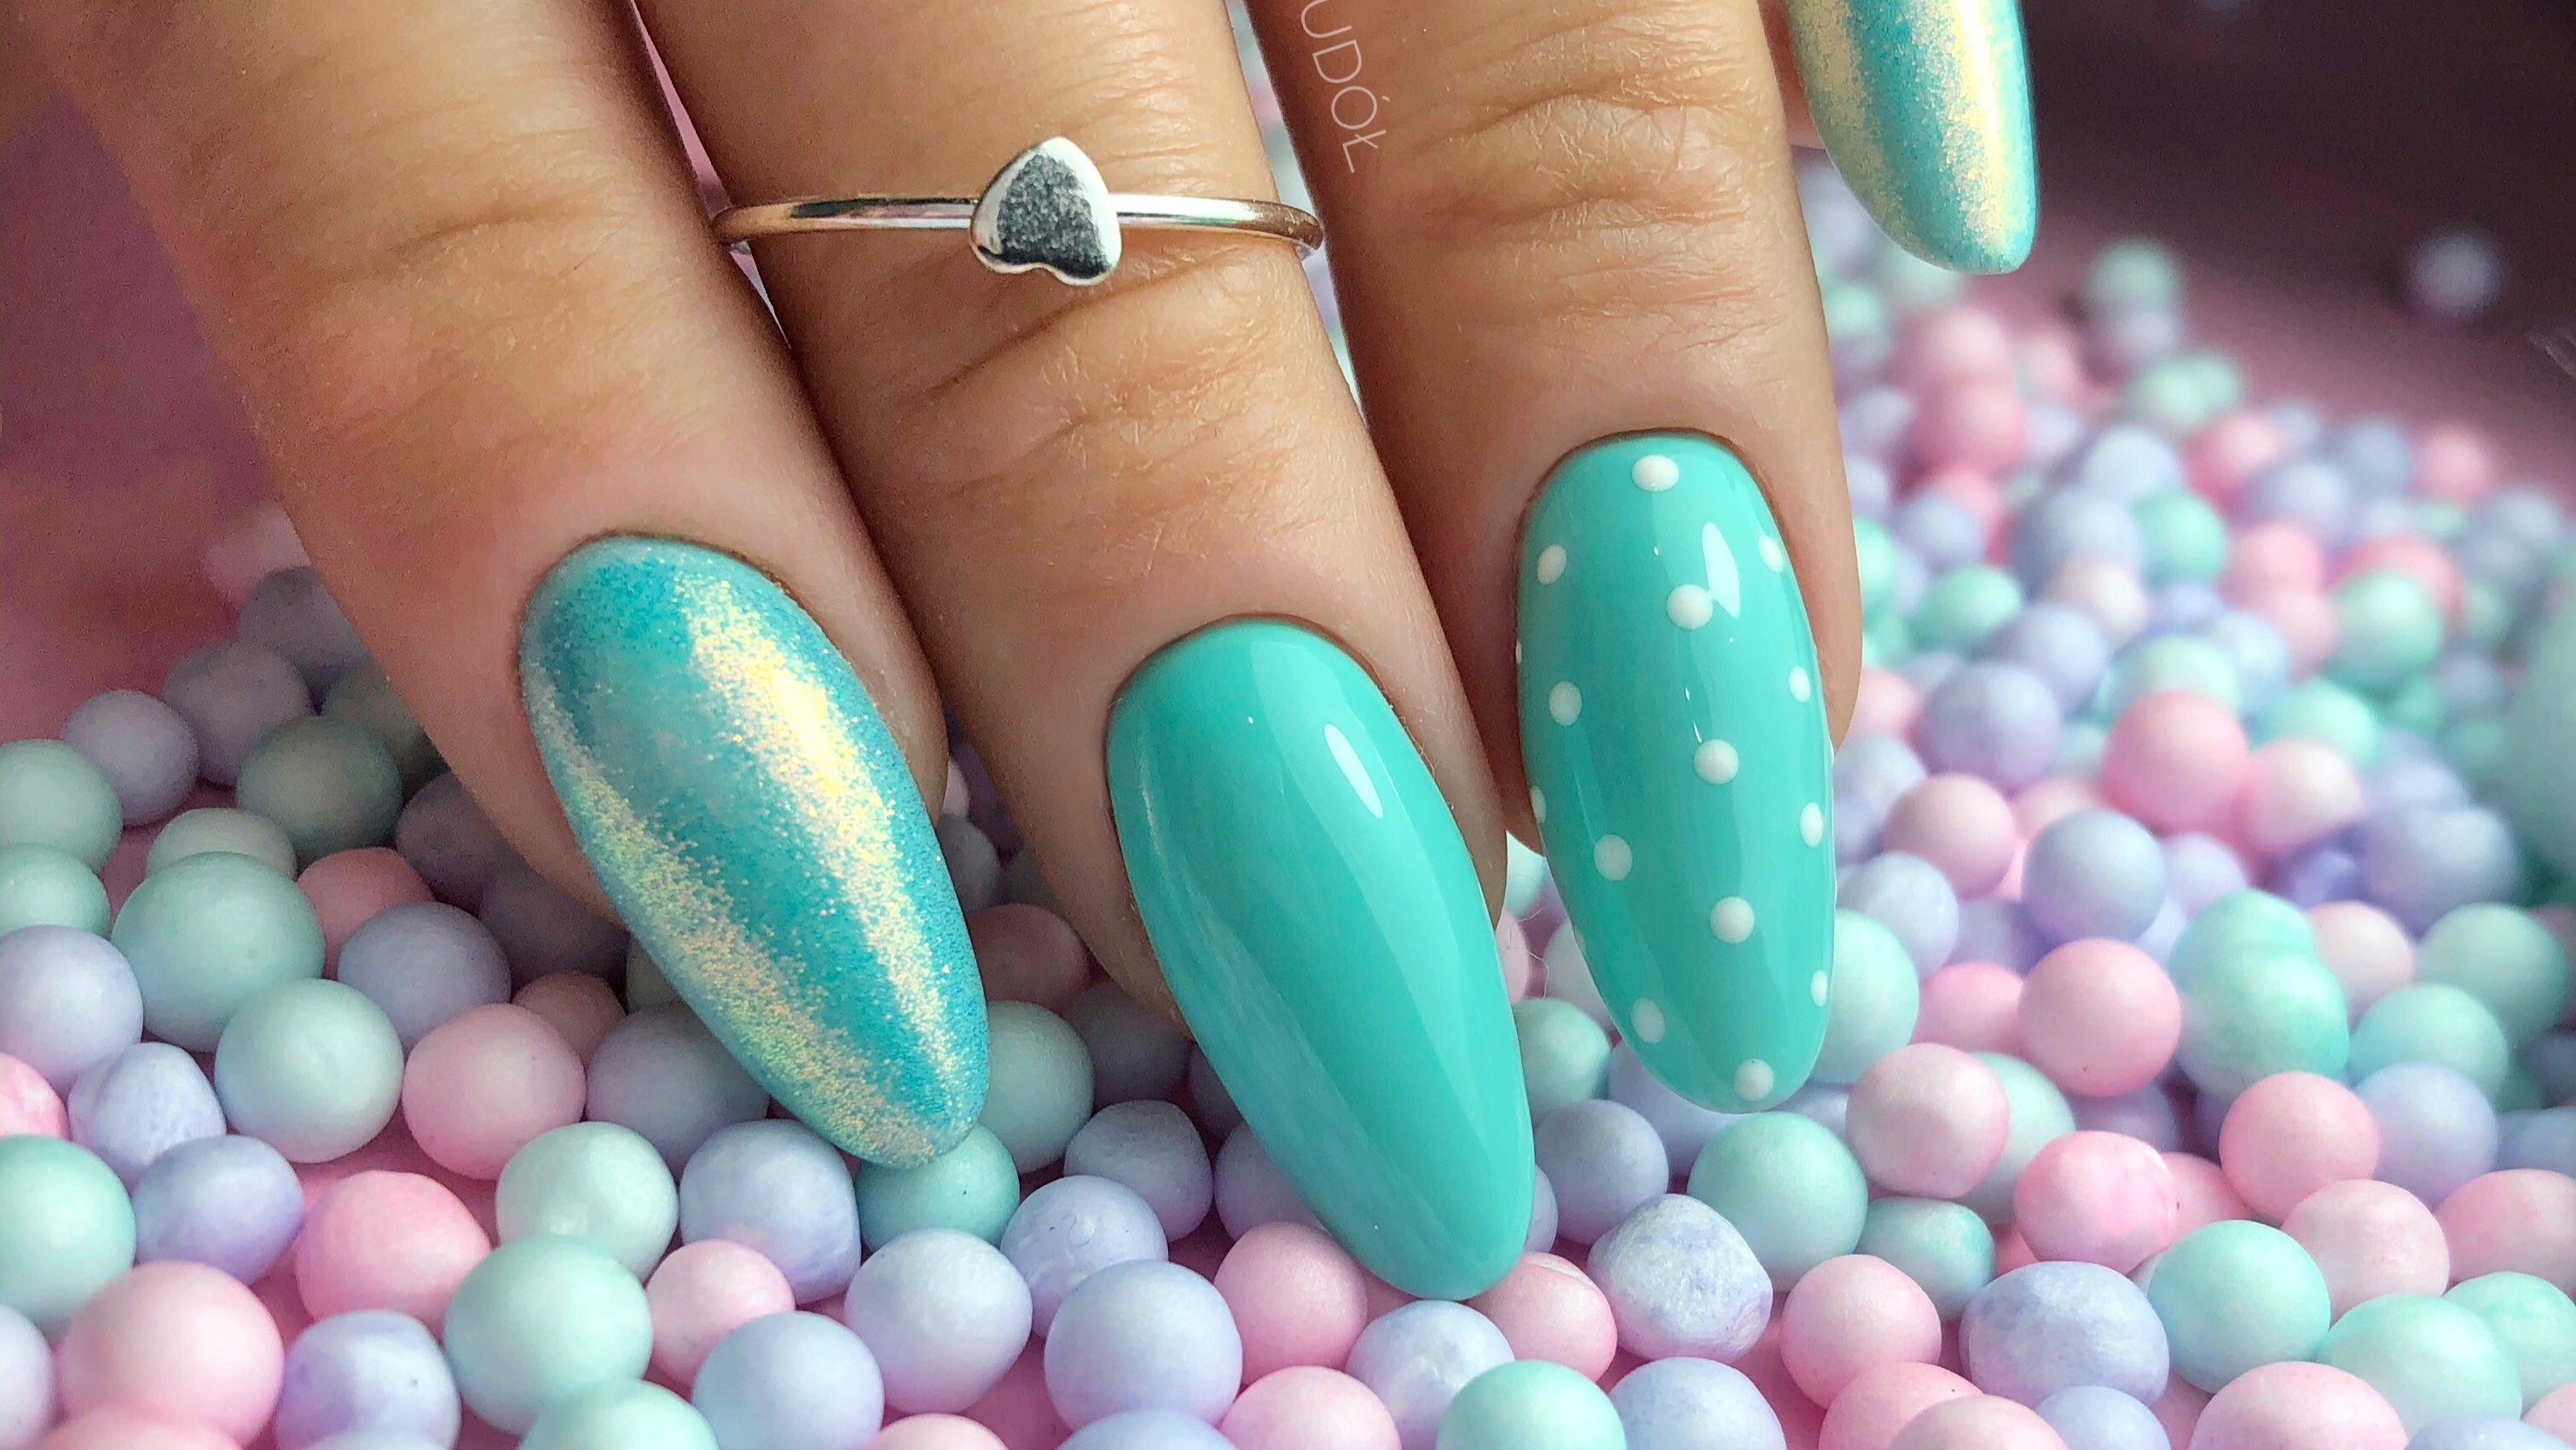 The Ultimate Guide on How to Shape Your Nails